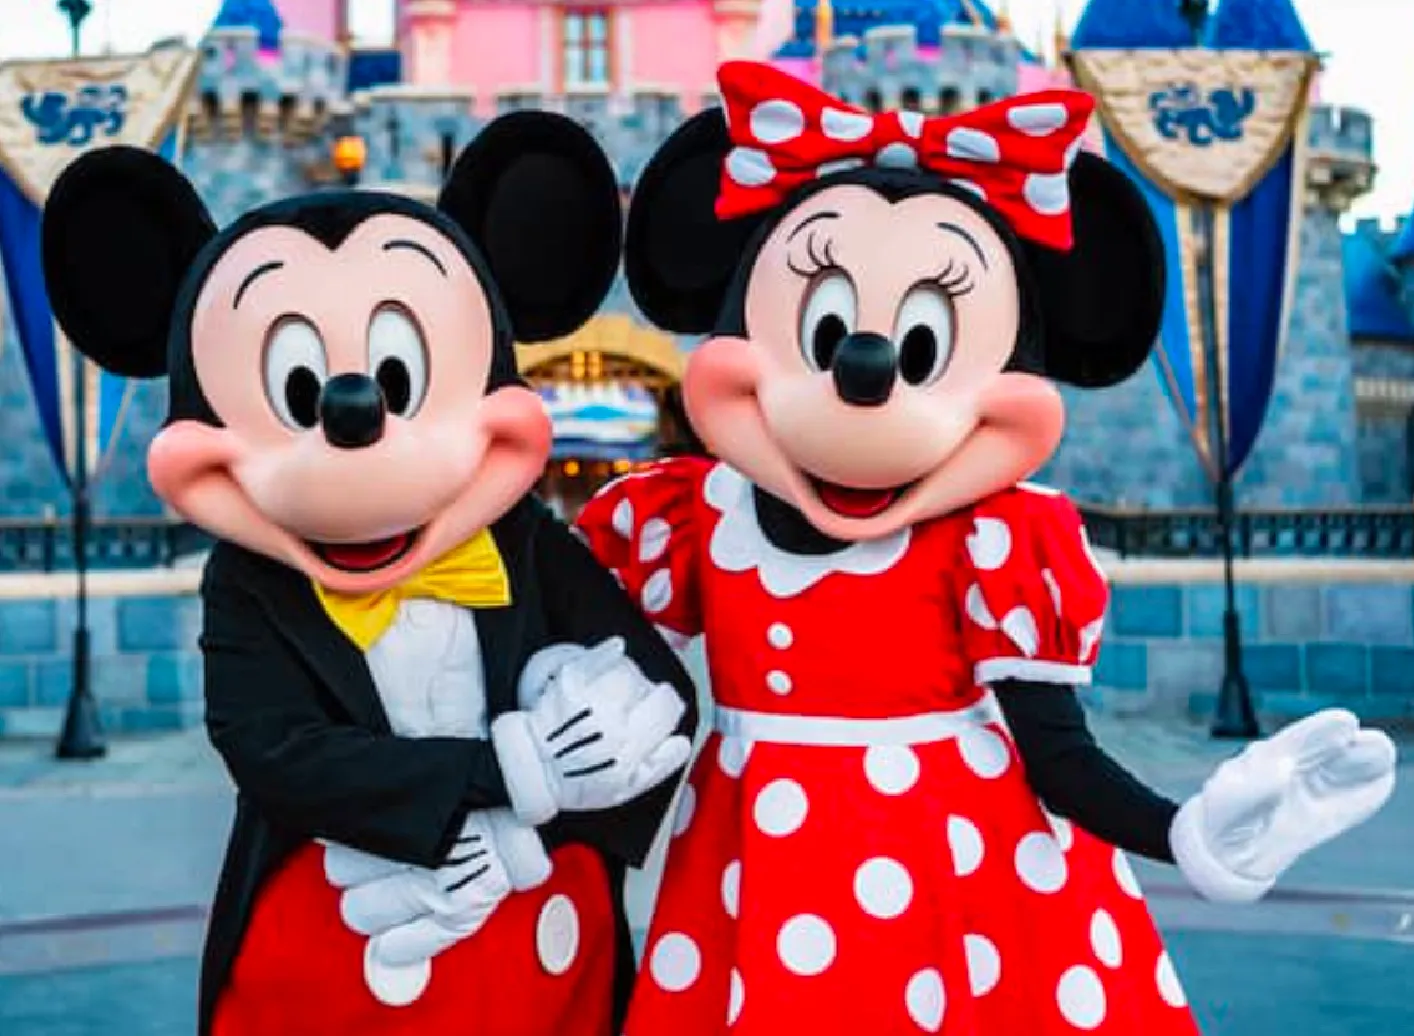 Mickey and Minnie Mouse standing together in front of park rides